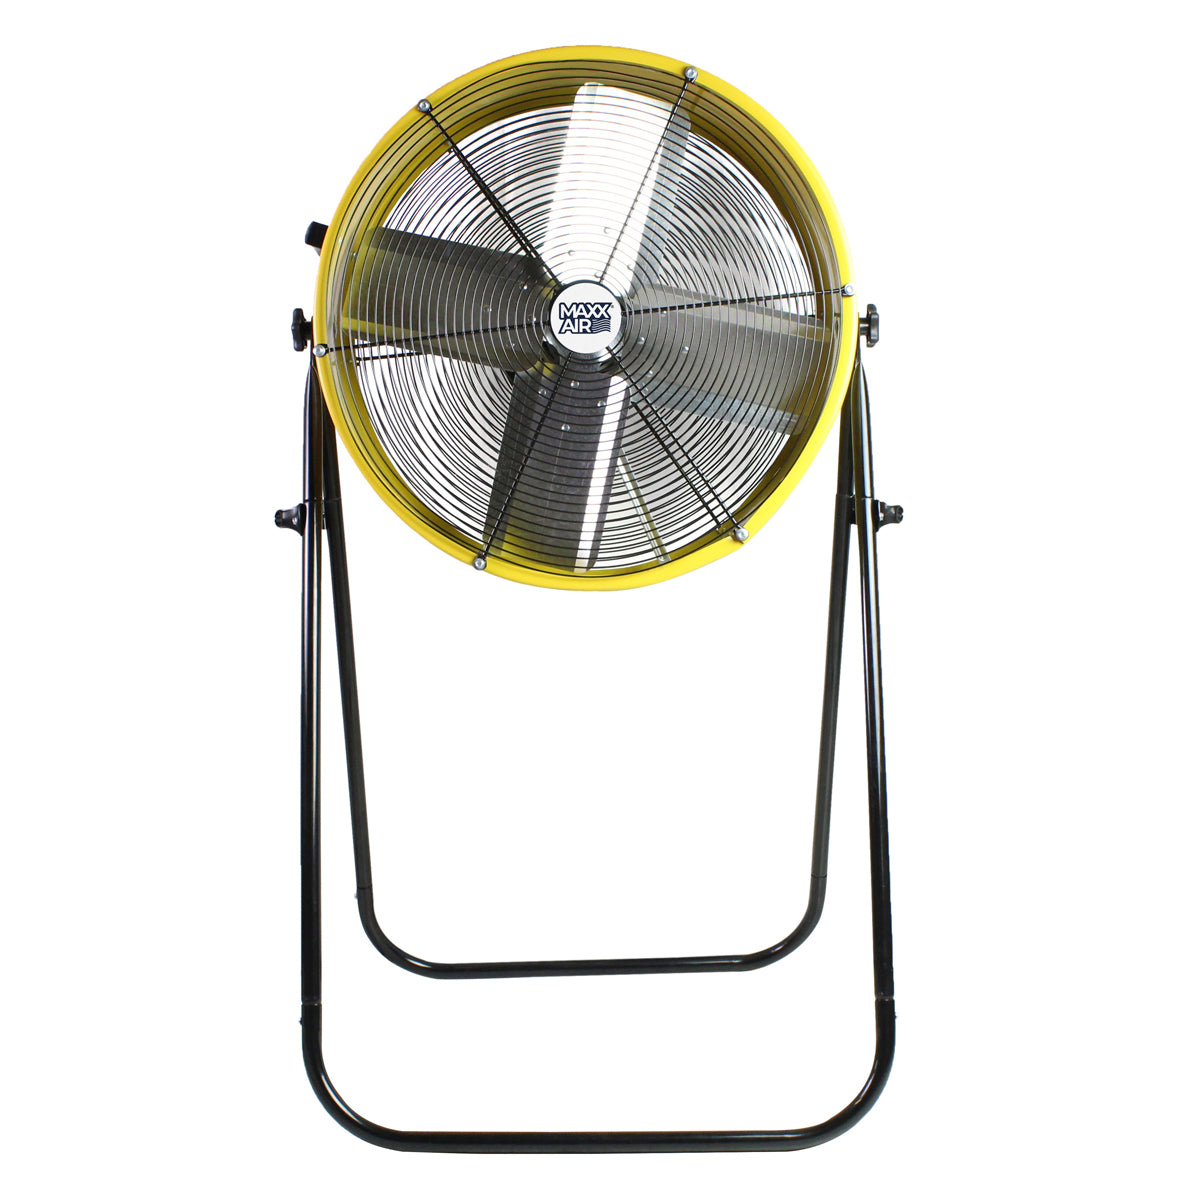 Maxx Air 24 In. 2-Speed Tilting Direct Drive Drum Fan with Extension Legs